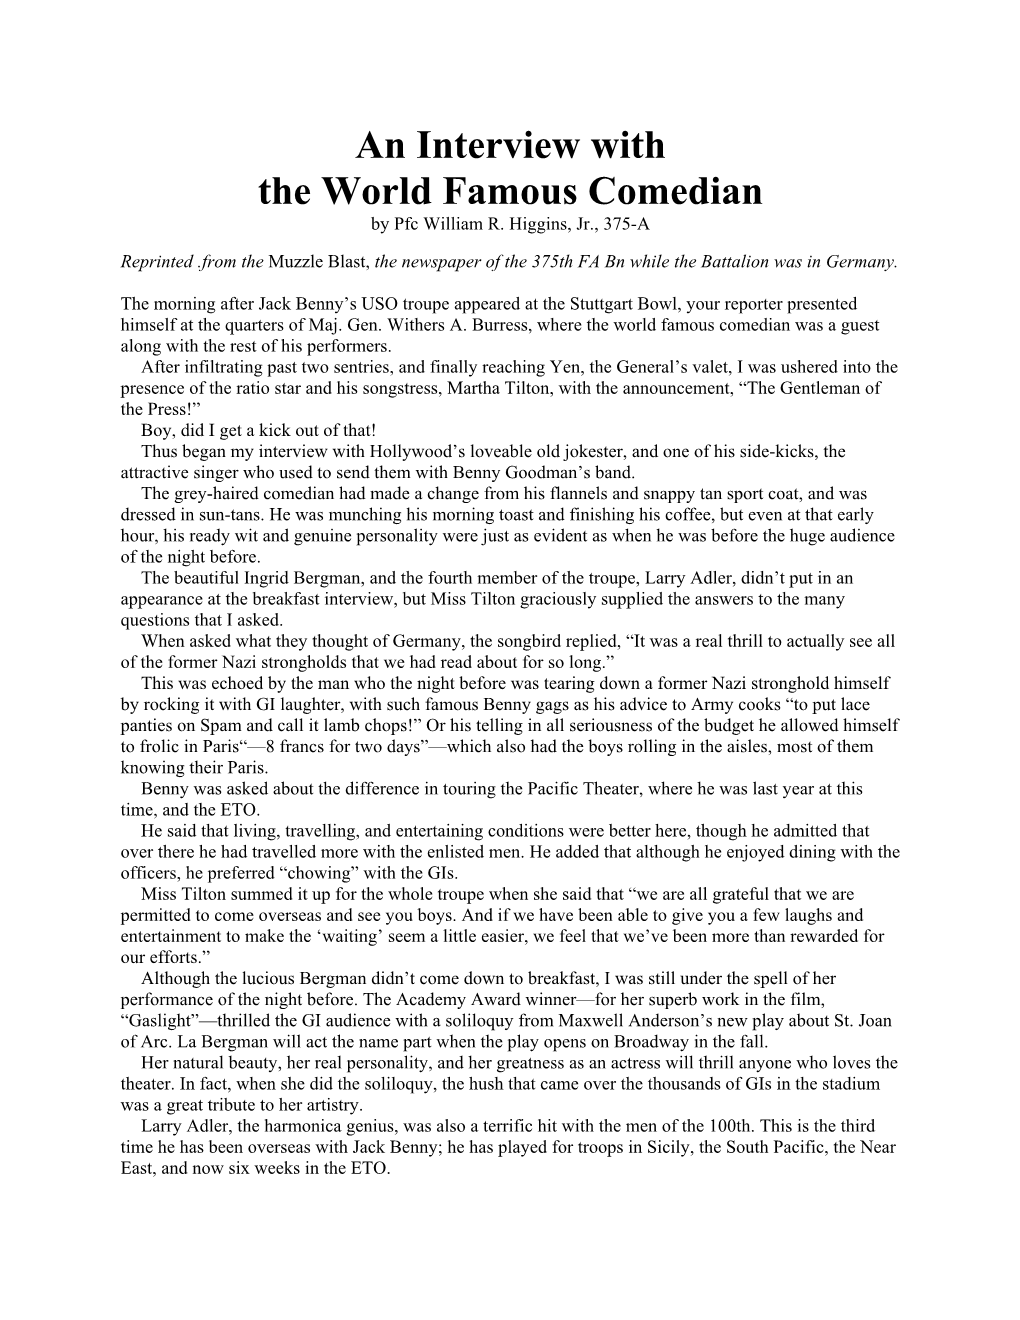 An Interview with the World Famous Comedian by Pfc William R